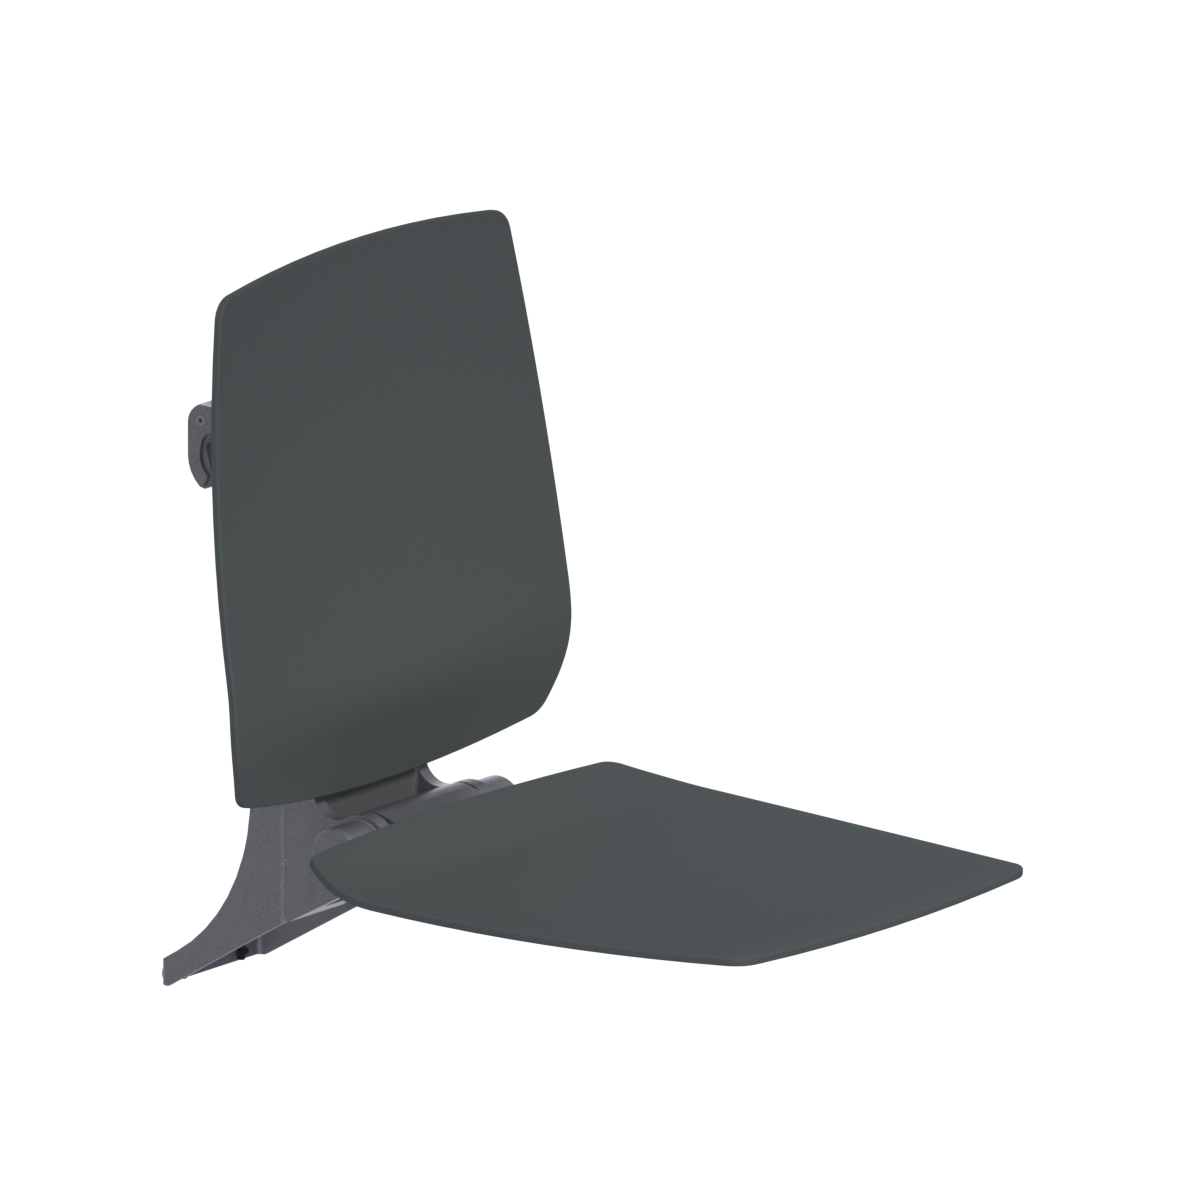 Ascento Hanging seat CH, with Backrest, for Cavere Care, 412 x 640 x 574 mm, Ascento Dark grey